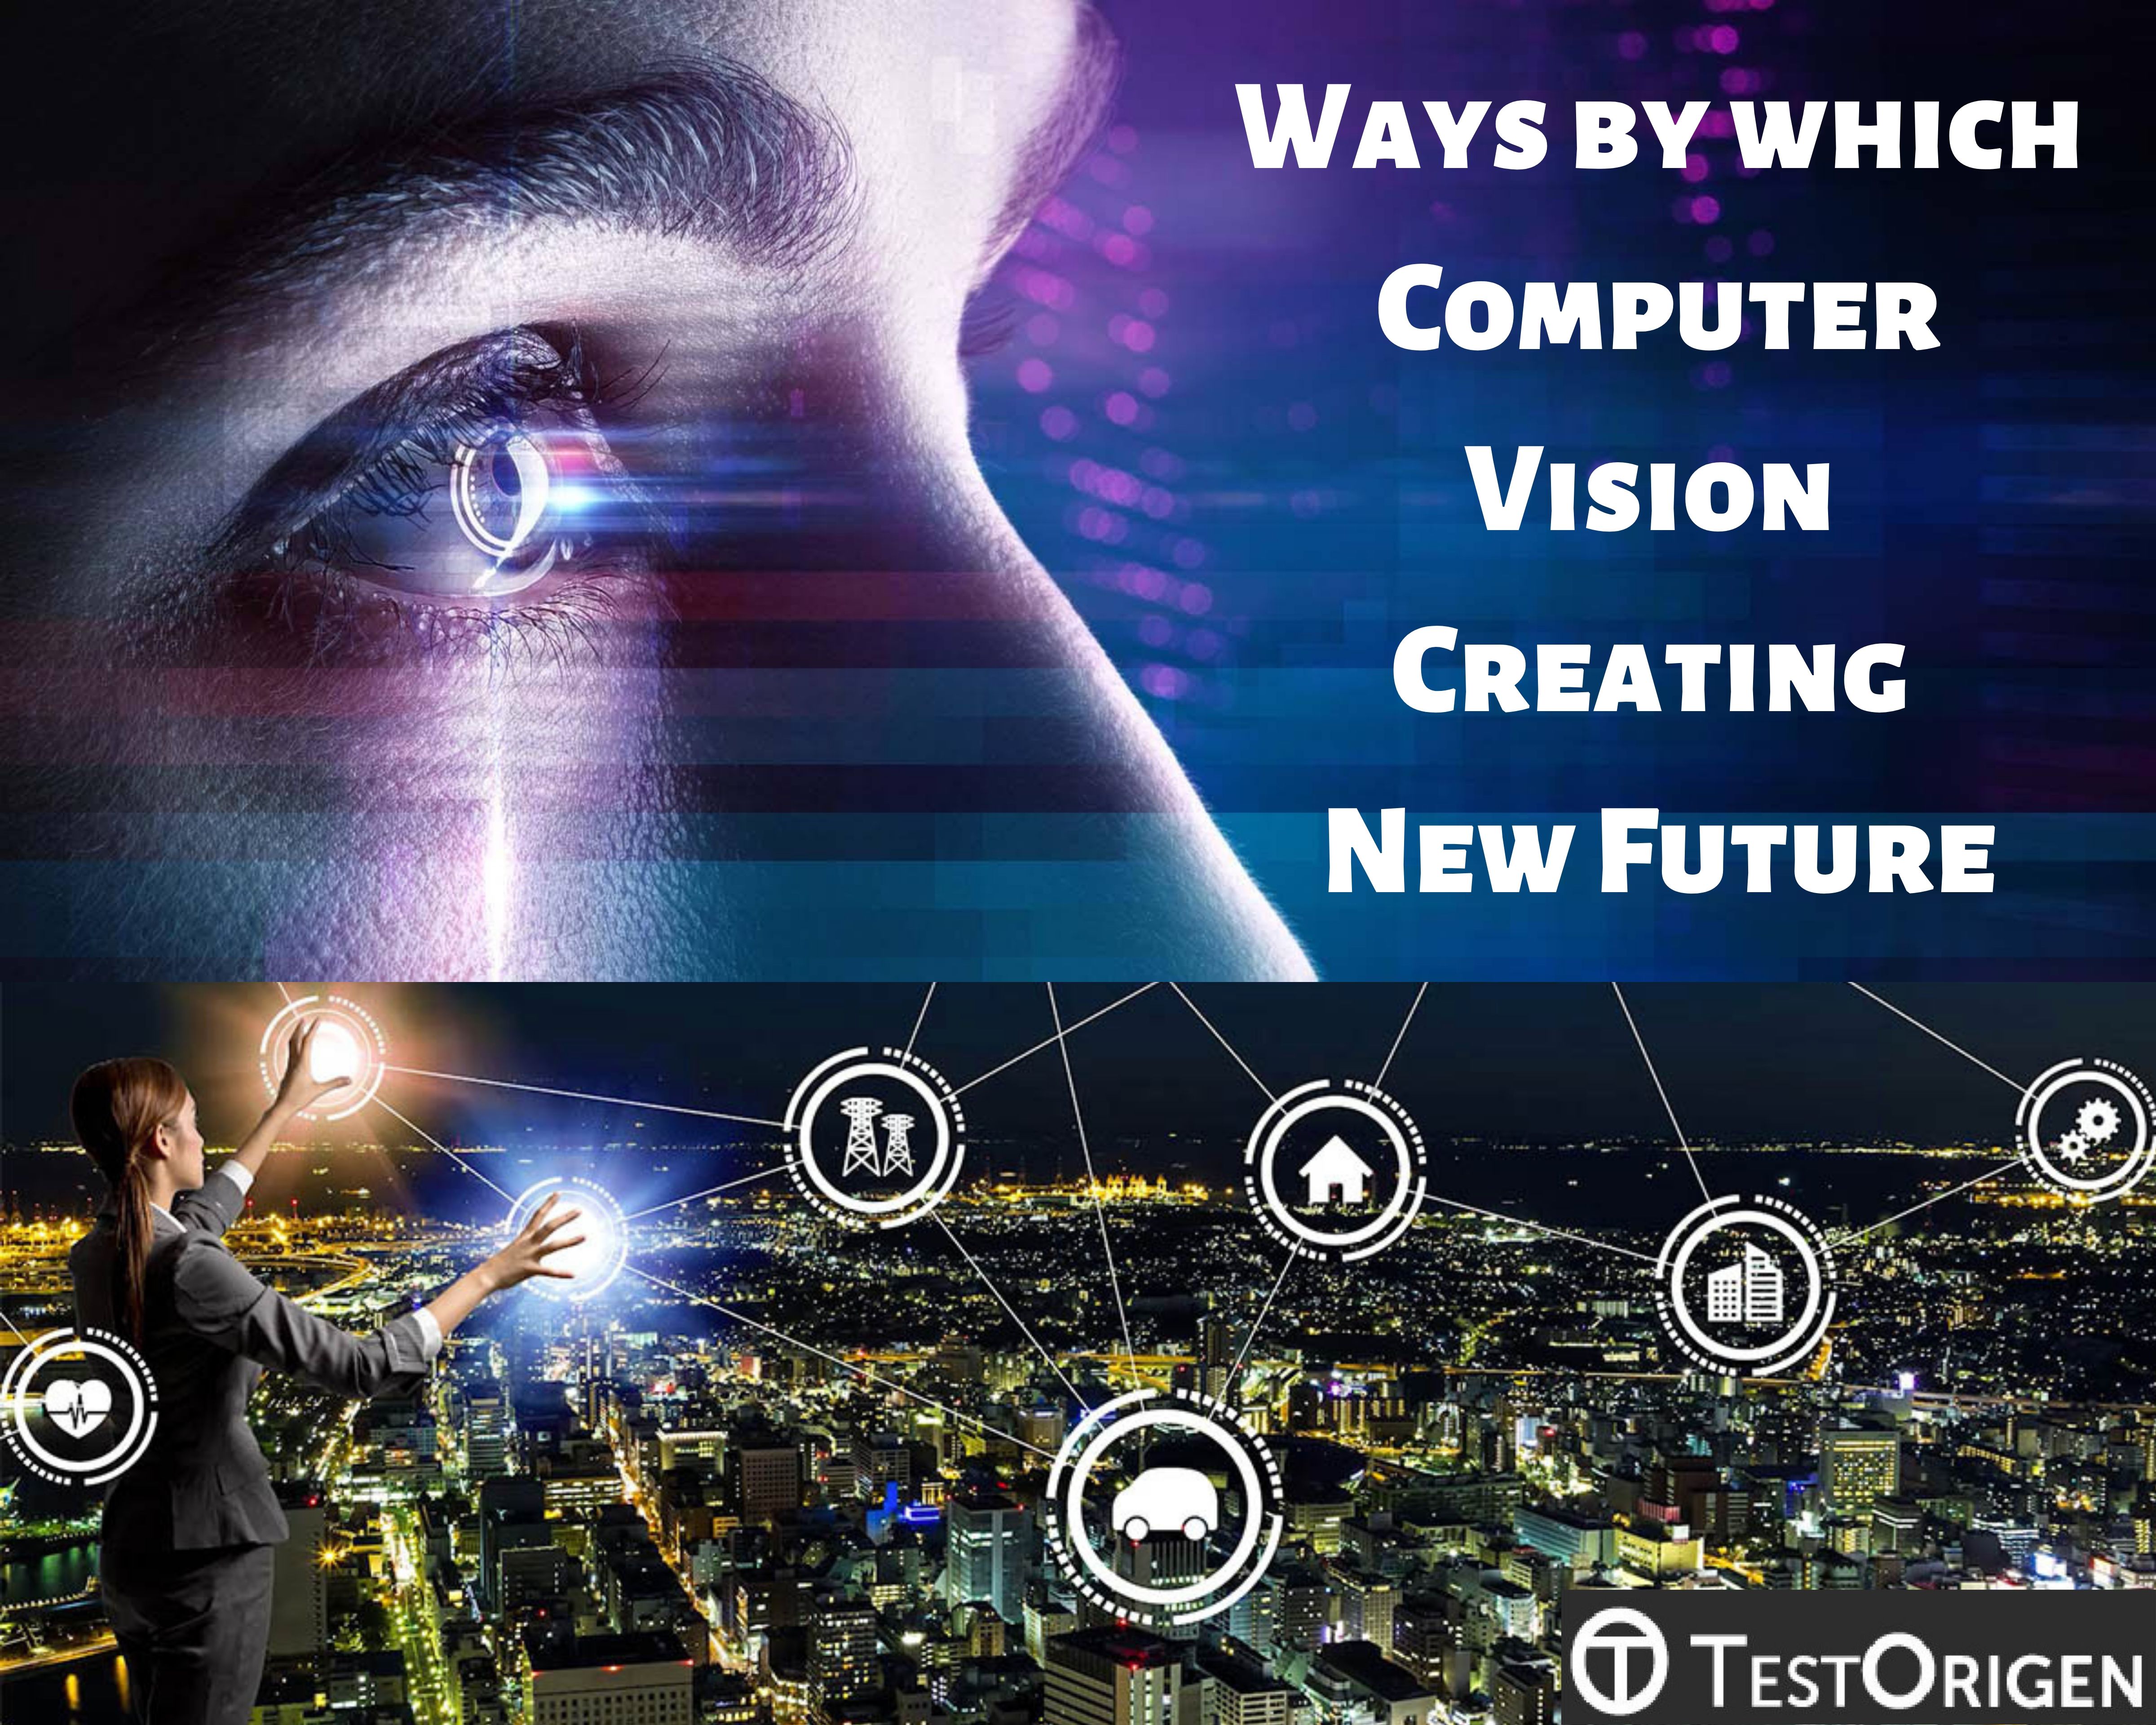 Ways by which Computer Vision Creating New Future